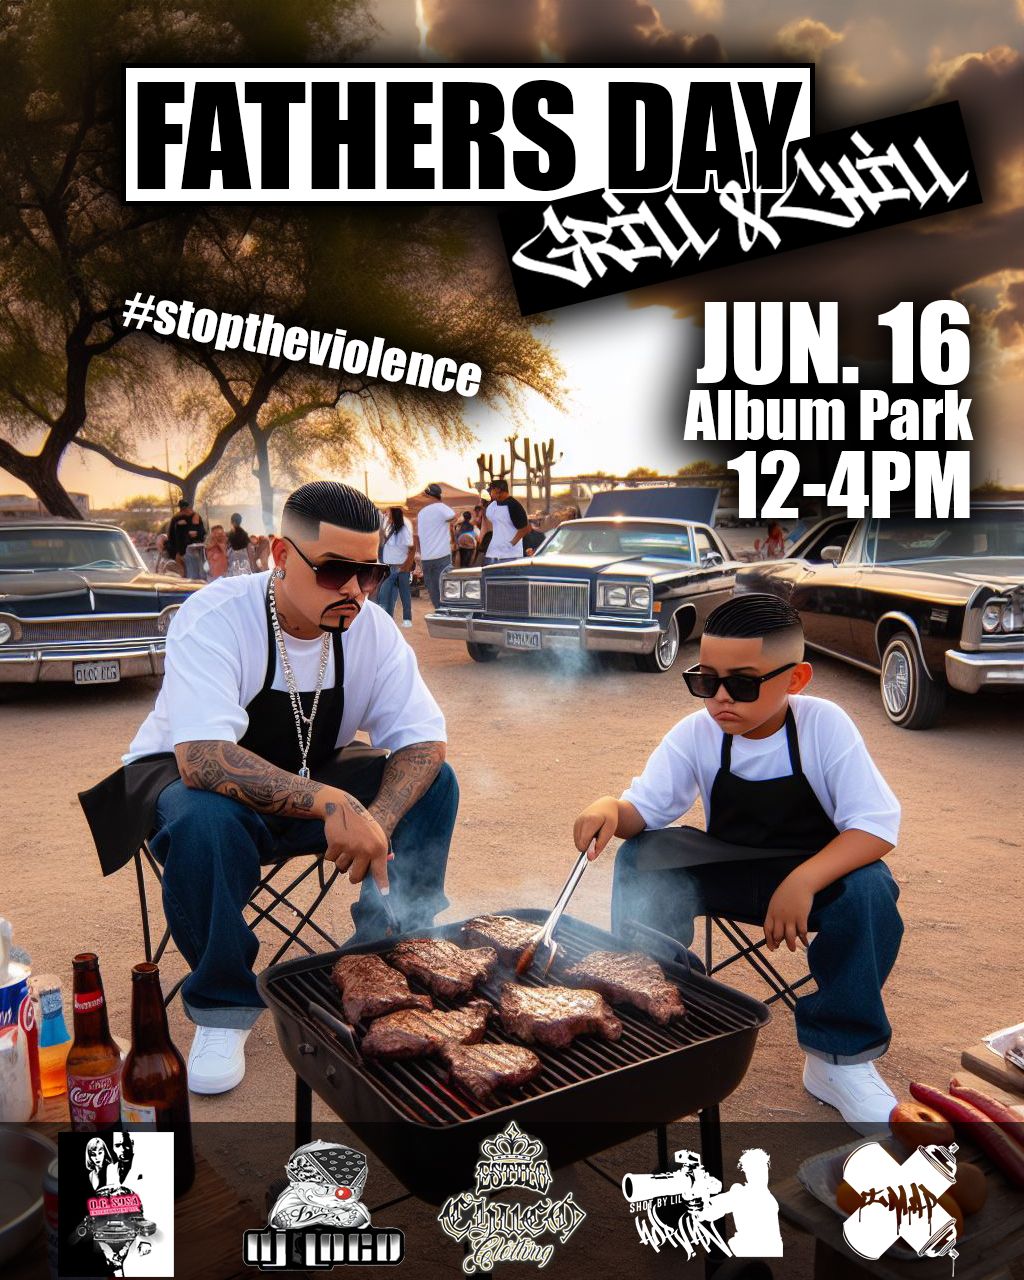 FATHERS DAY GRILL AND CHILL - JUN 16th AT Album Park, El Paso Texas